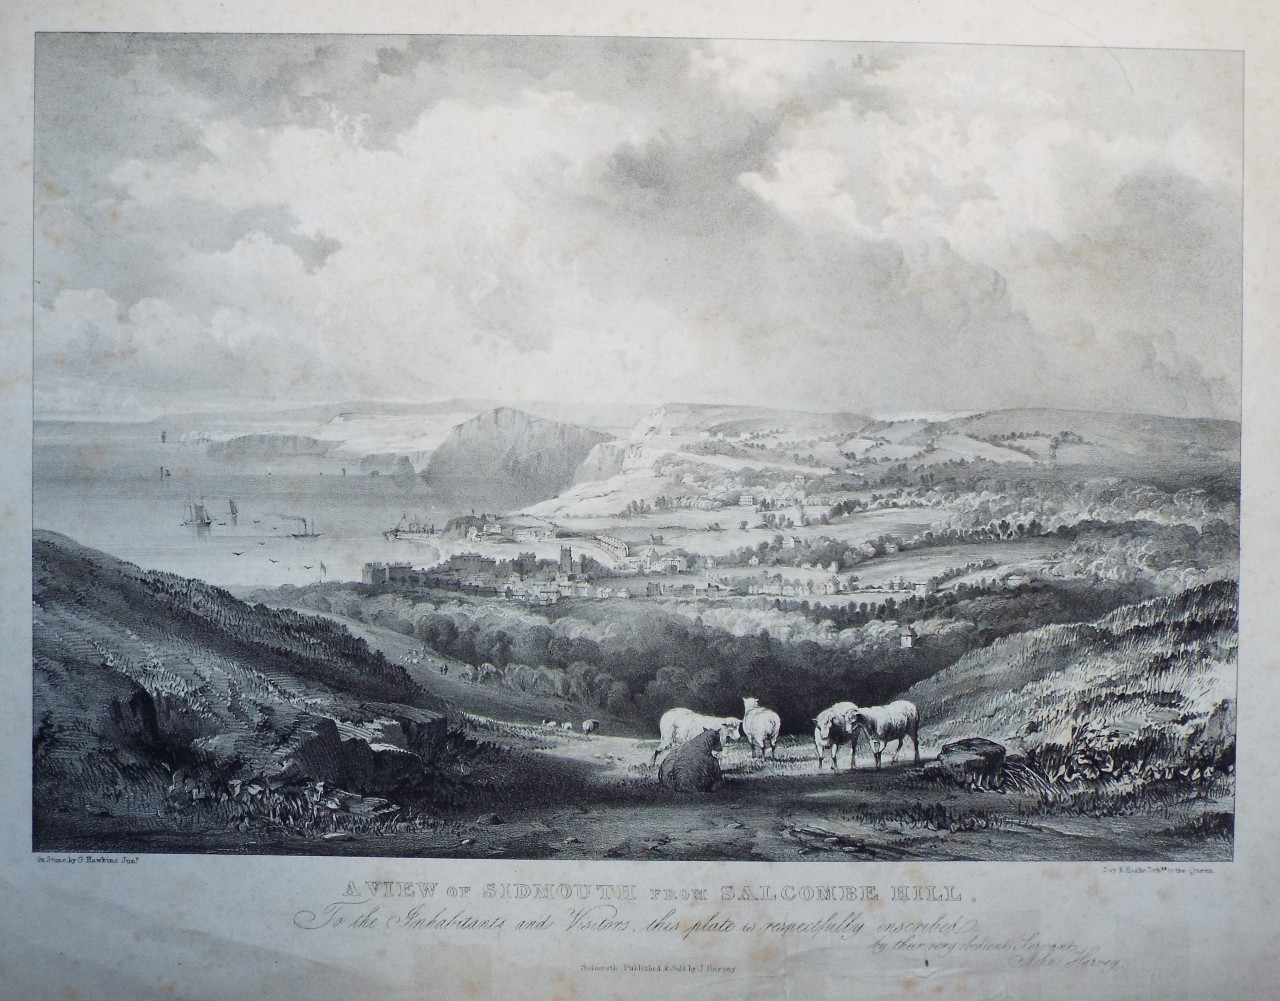 Lithograph - A View of Sidmouth from Salcombe Hill. - Hawkins